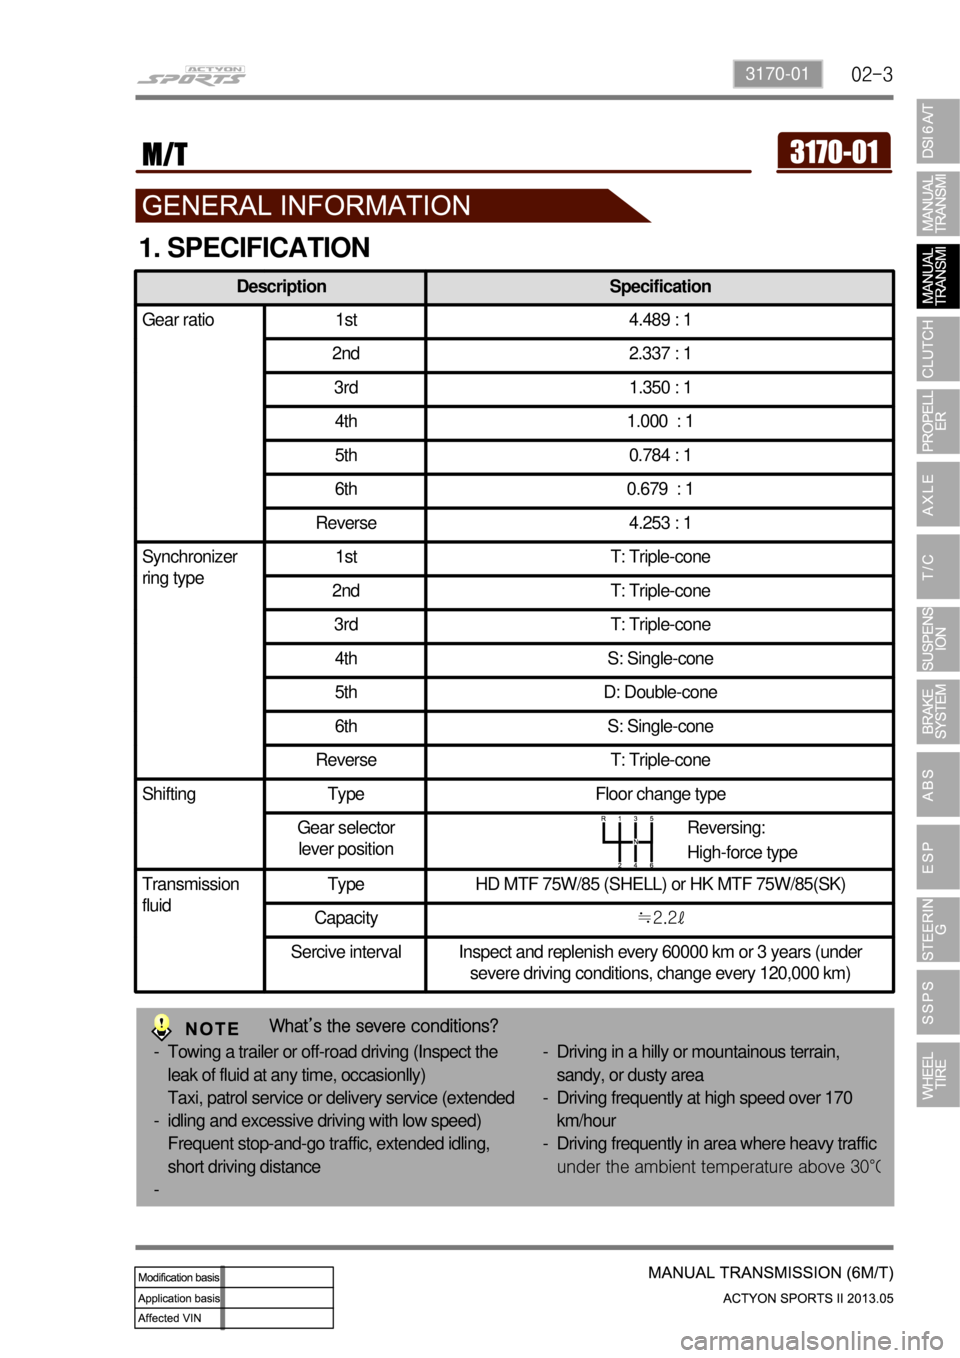 SSANGYONG NEW ACTYON SPORTS 2013 User Guide 02-33170-01
Description Specification
Gear ratio 1st 4.489 : 1
2nd 2.337 : 1
3rd 1.350 : 1
4th 1.000  : 1
5th 0.784 : 1
6th 0.679  : 1
Reverse 4.253 : 1
Synchronizer 
ring type1st T: Triple-cone
2nd T